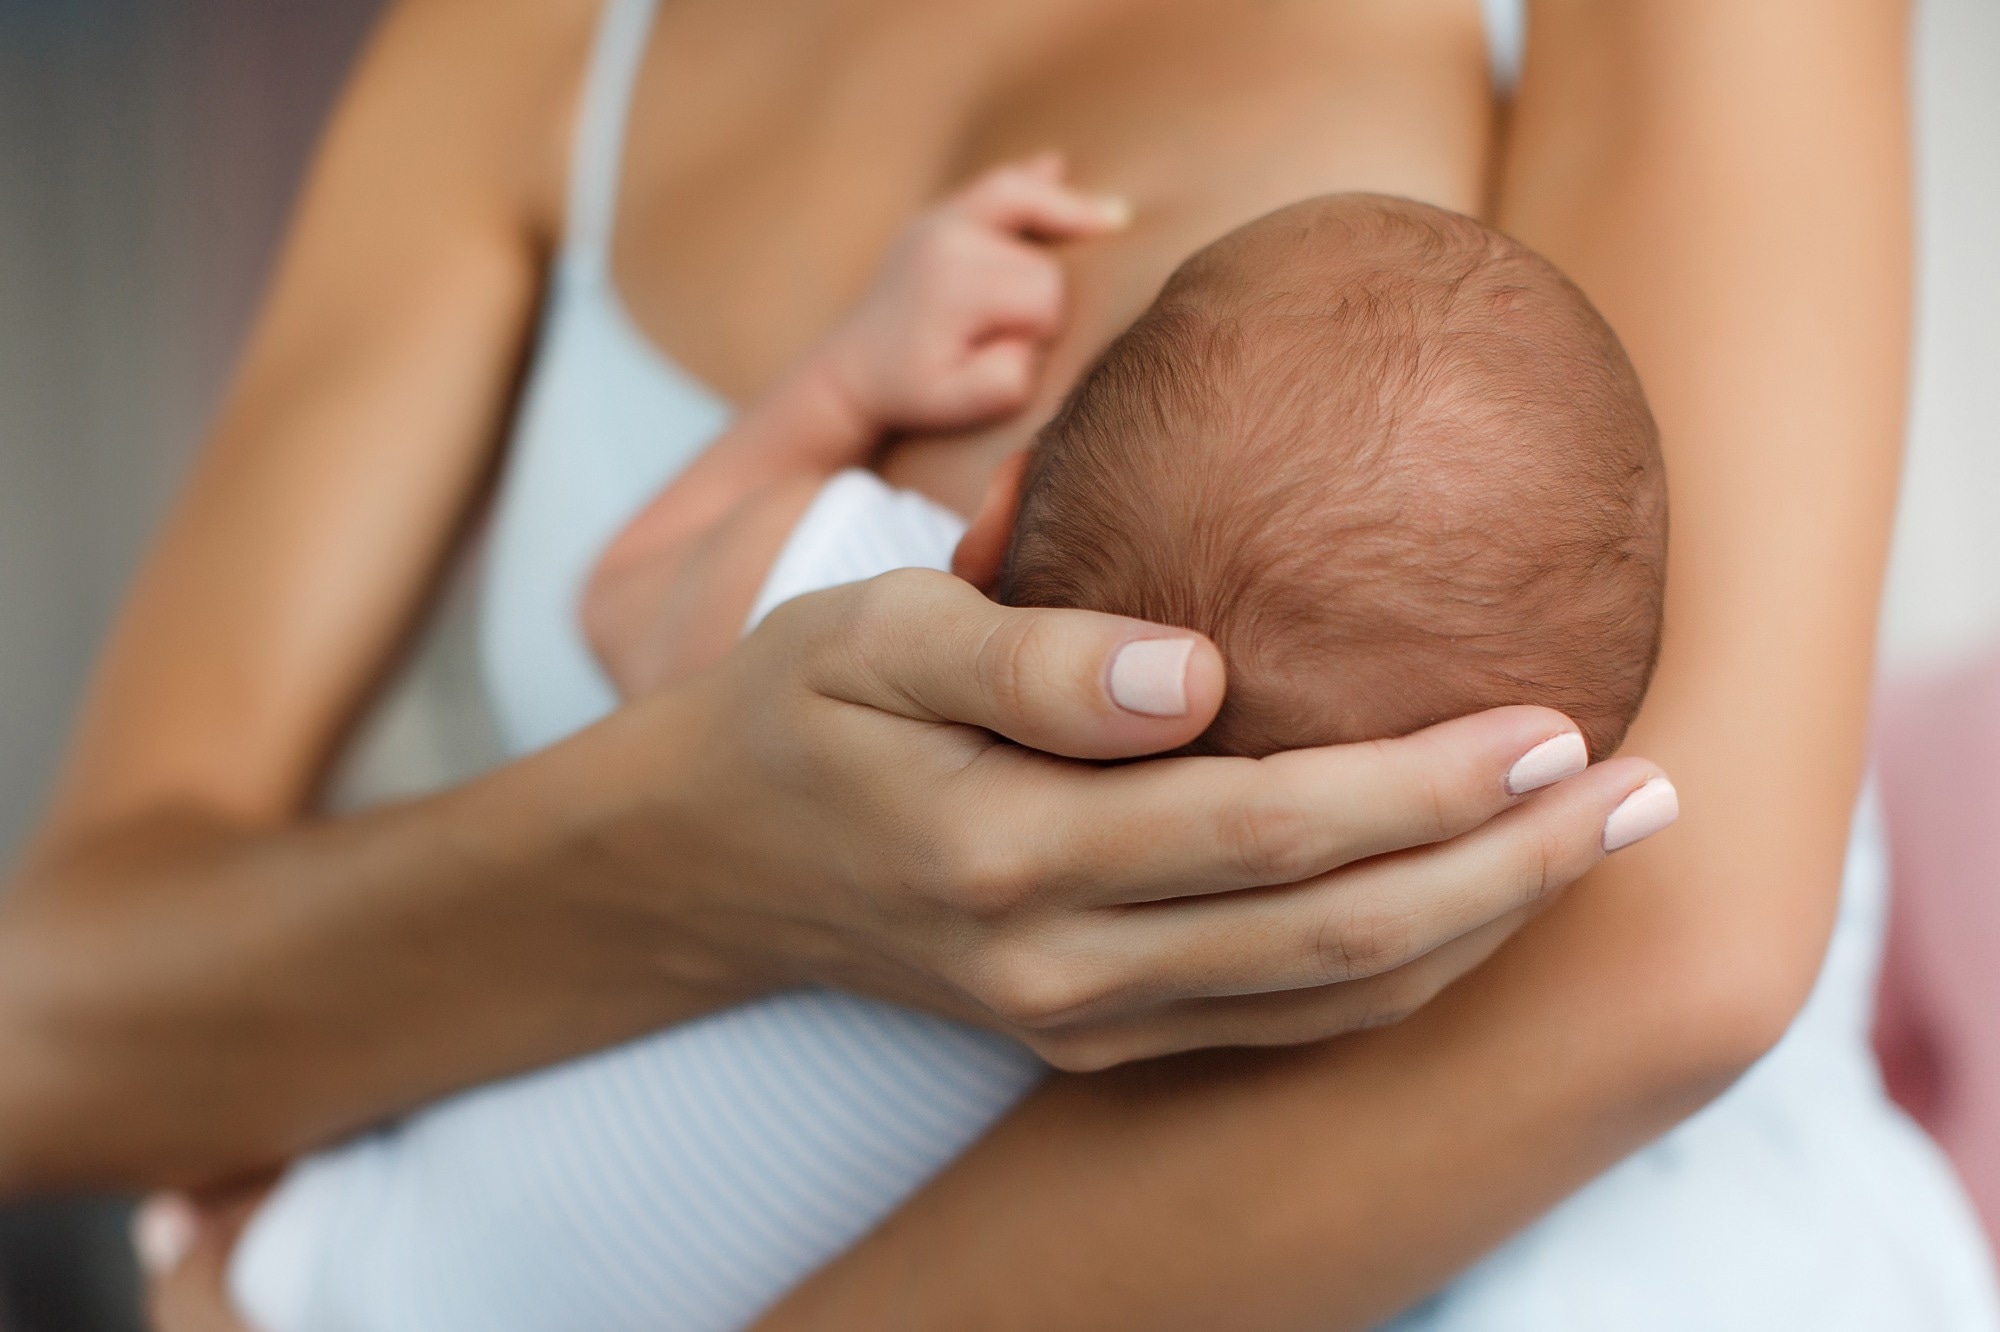 Reduced initiation and duration of breastfeeding in SARS-CoV-2-positive mothers